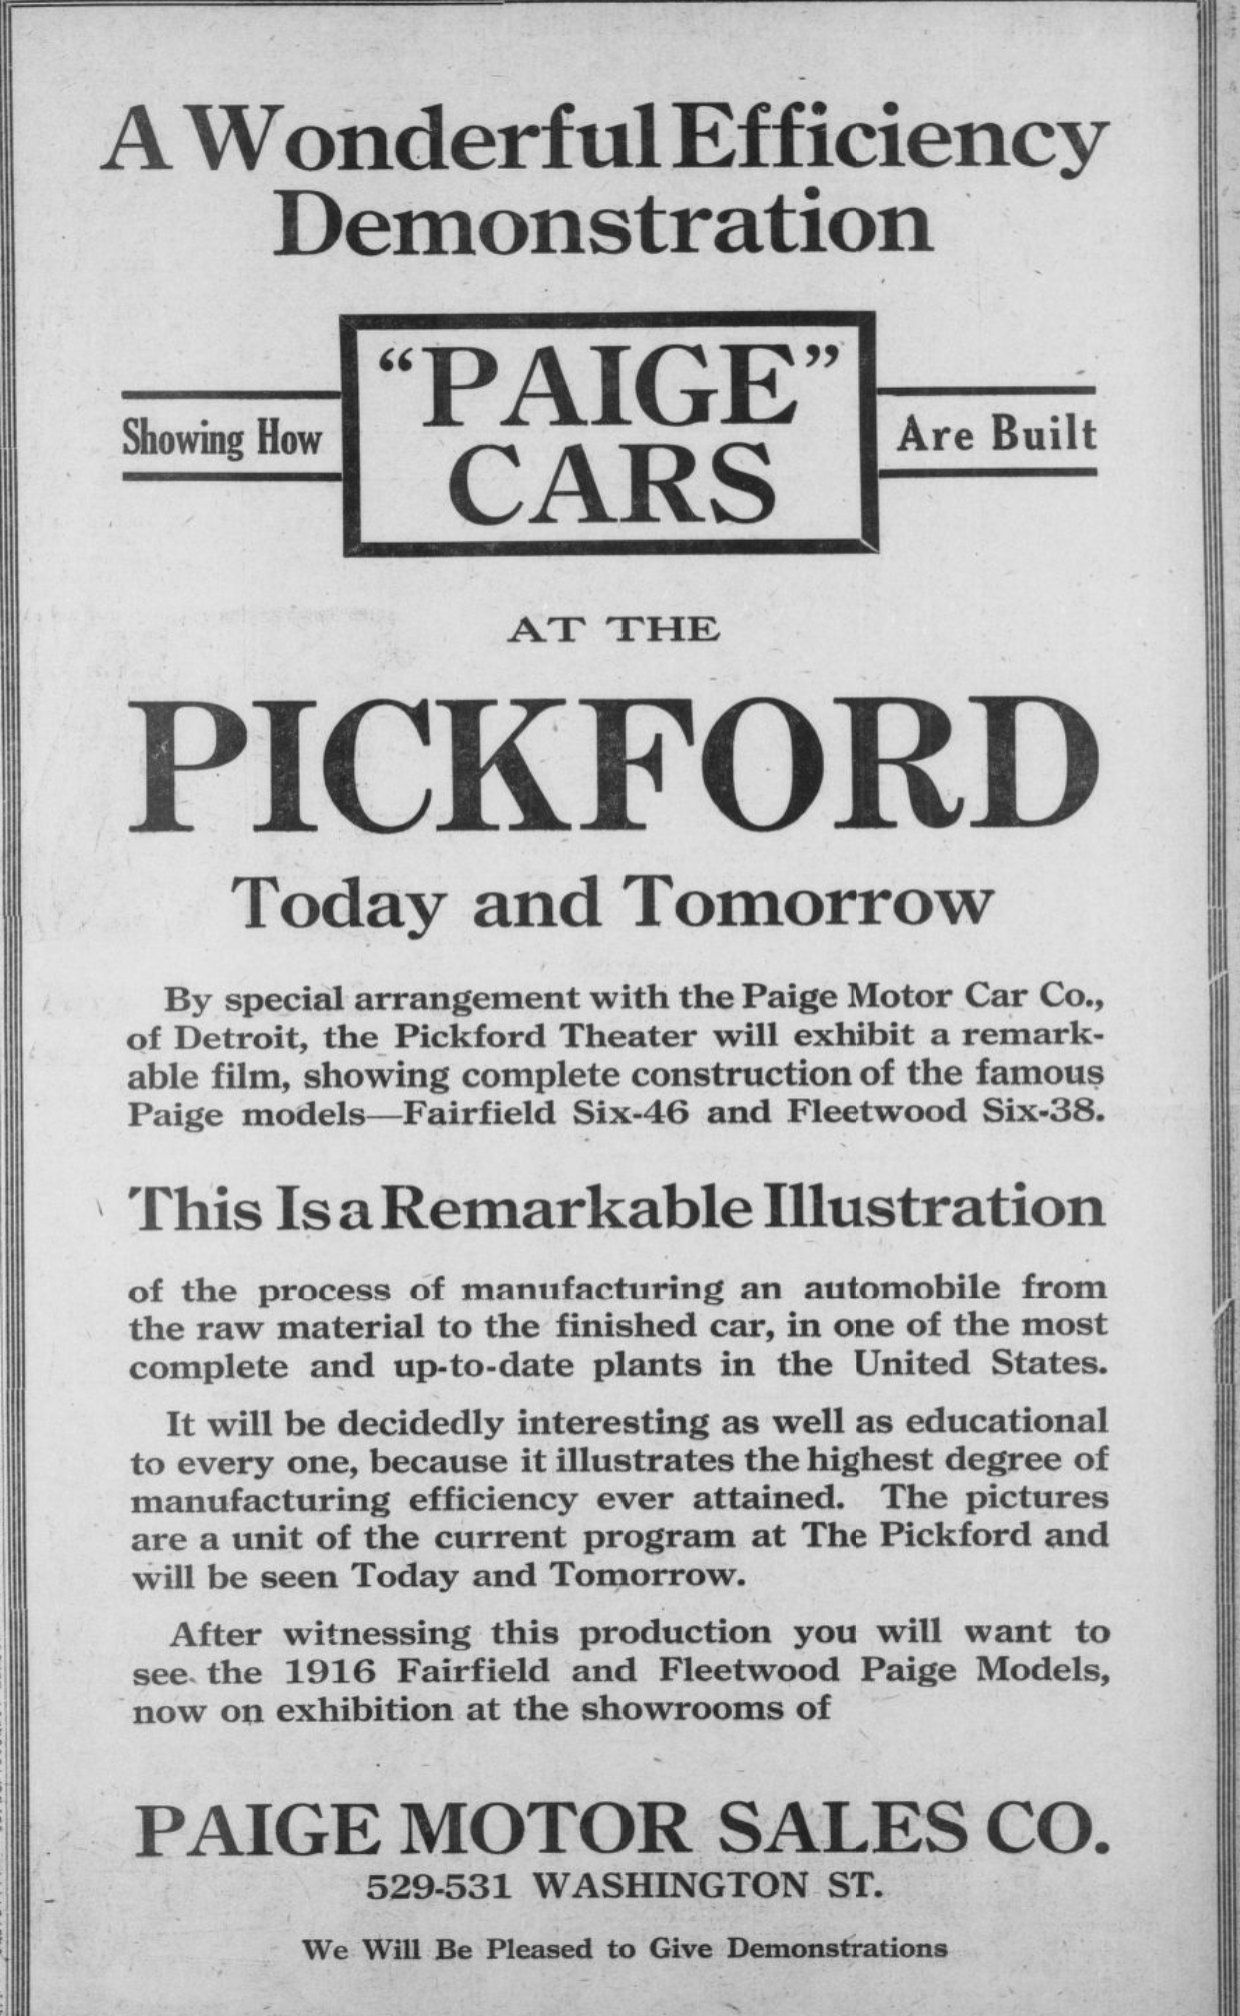 An advertisement presenting an educational film on car production at the Pickford.